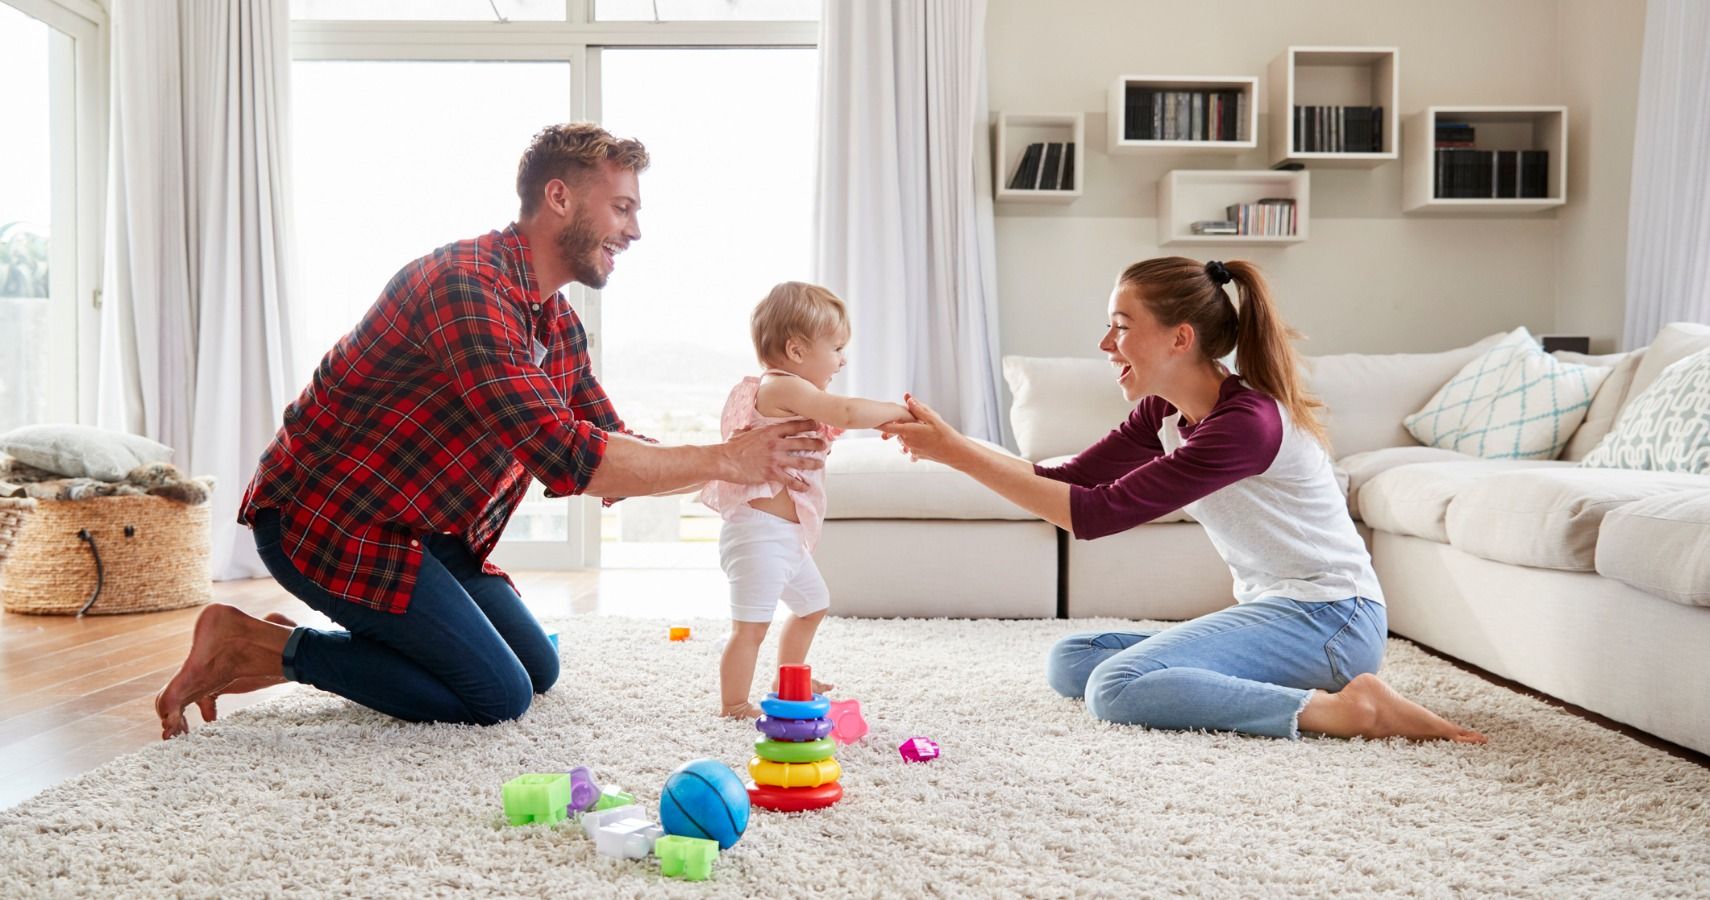 toddler-girl-walking-from-dad-to-mum-in-sitting-room-picture-id947849414